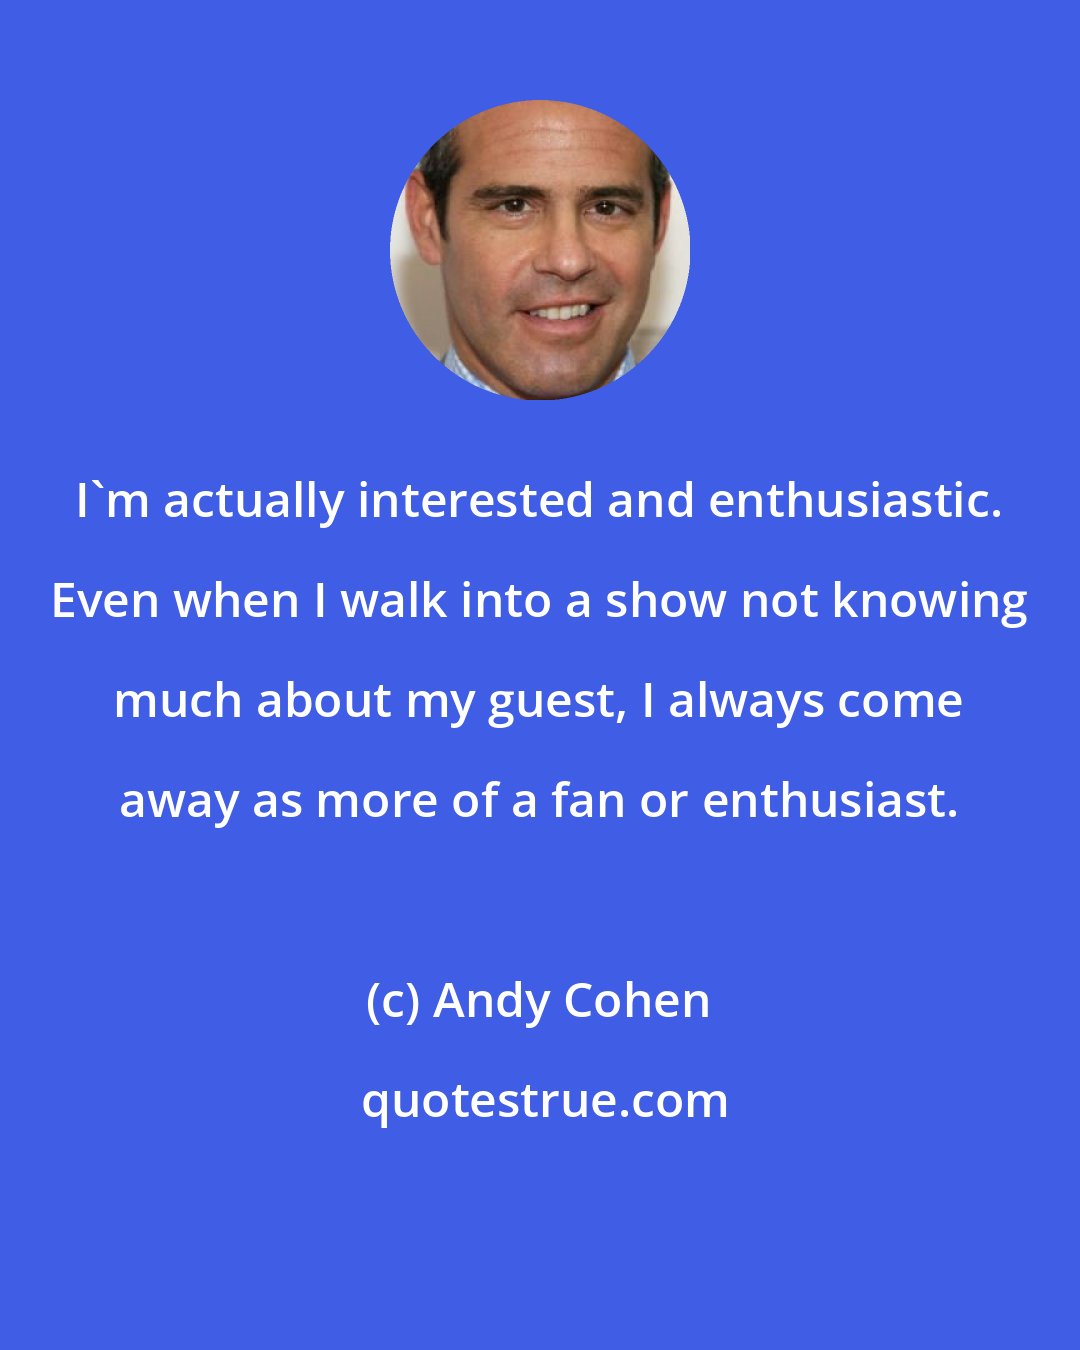 Andy Cohen: I'm actually interested and enthusiastic. Even when I walk into a show not knowing much about my guest, I always come away as more of a fan or enthusiast.